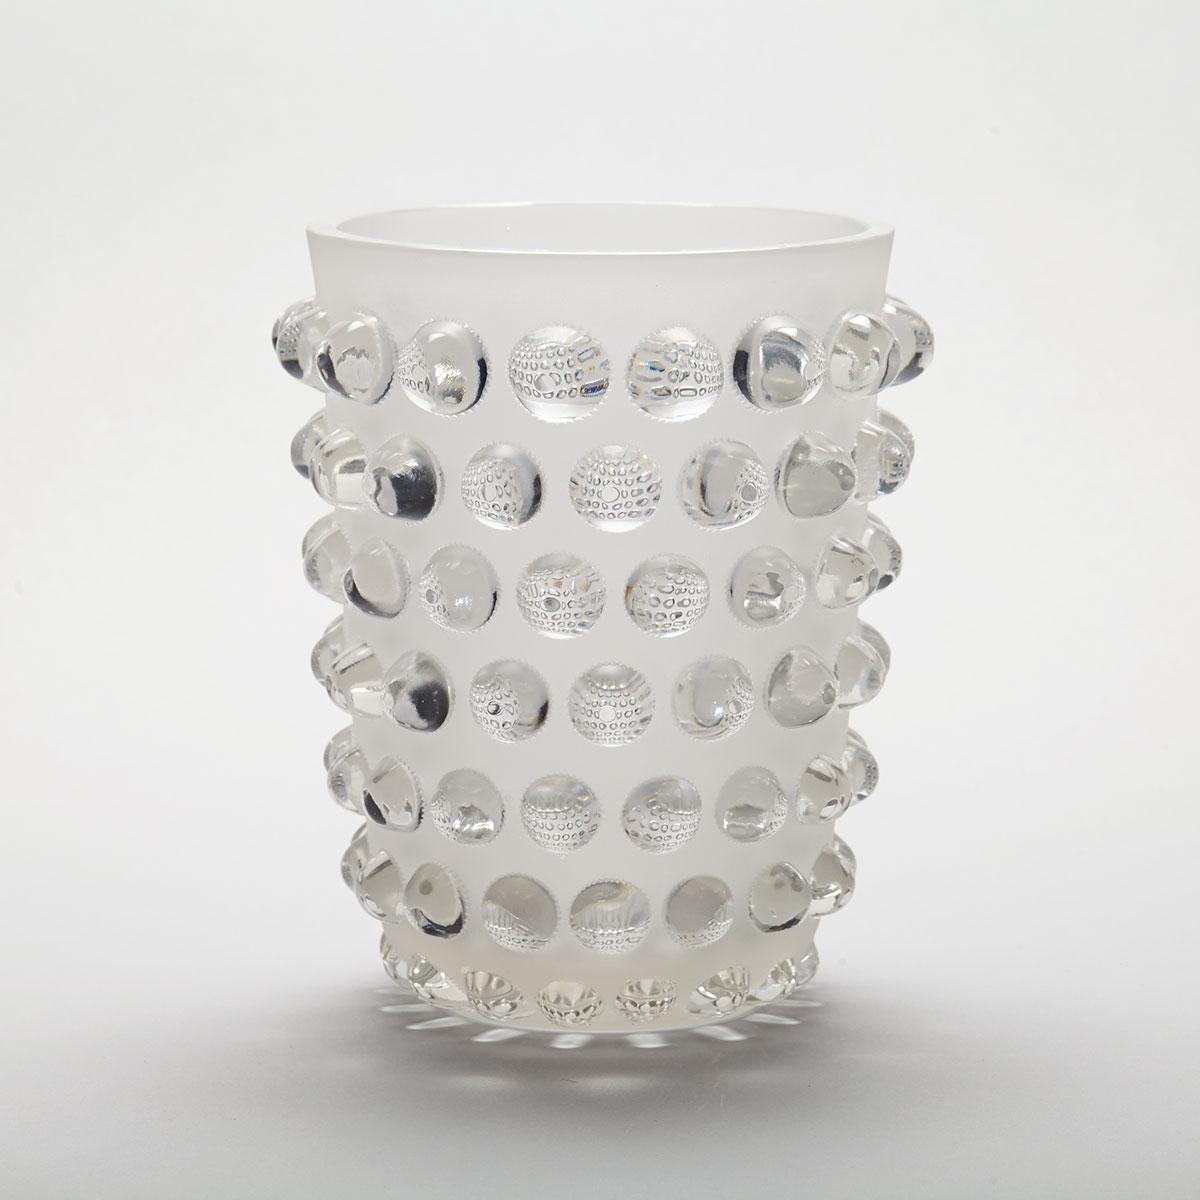 ‘Mossi’, Lalique Moulded and Partly Frosted Glass Vase, post-1945